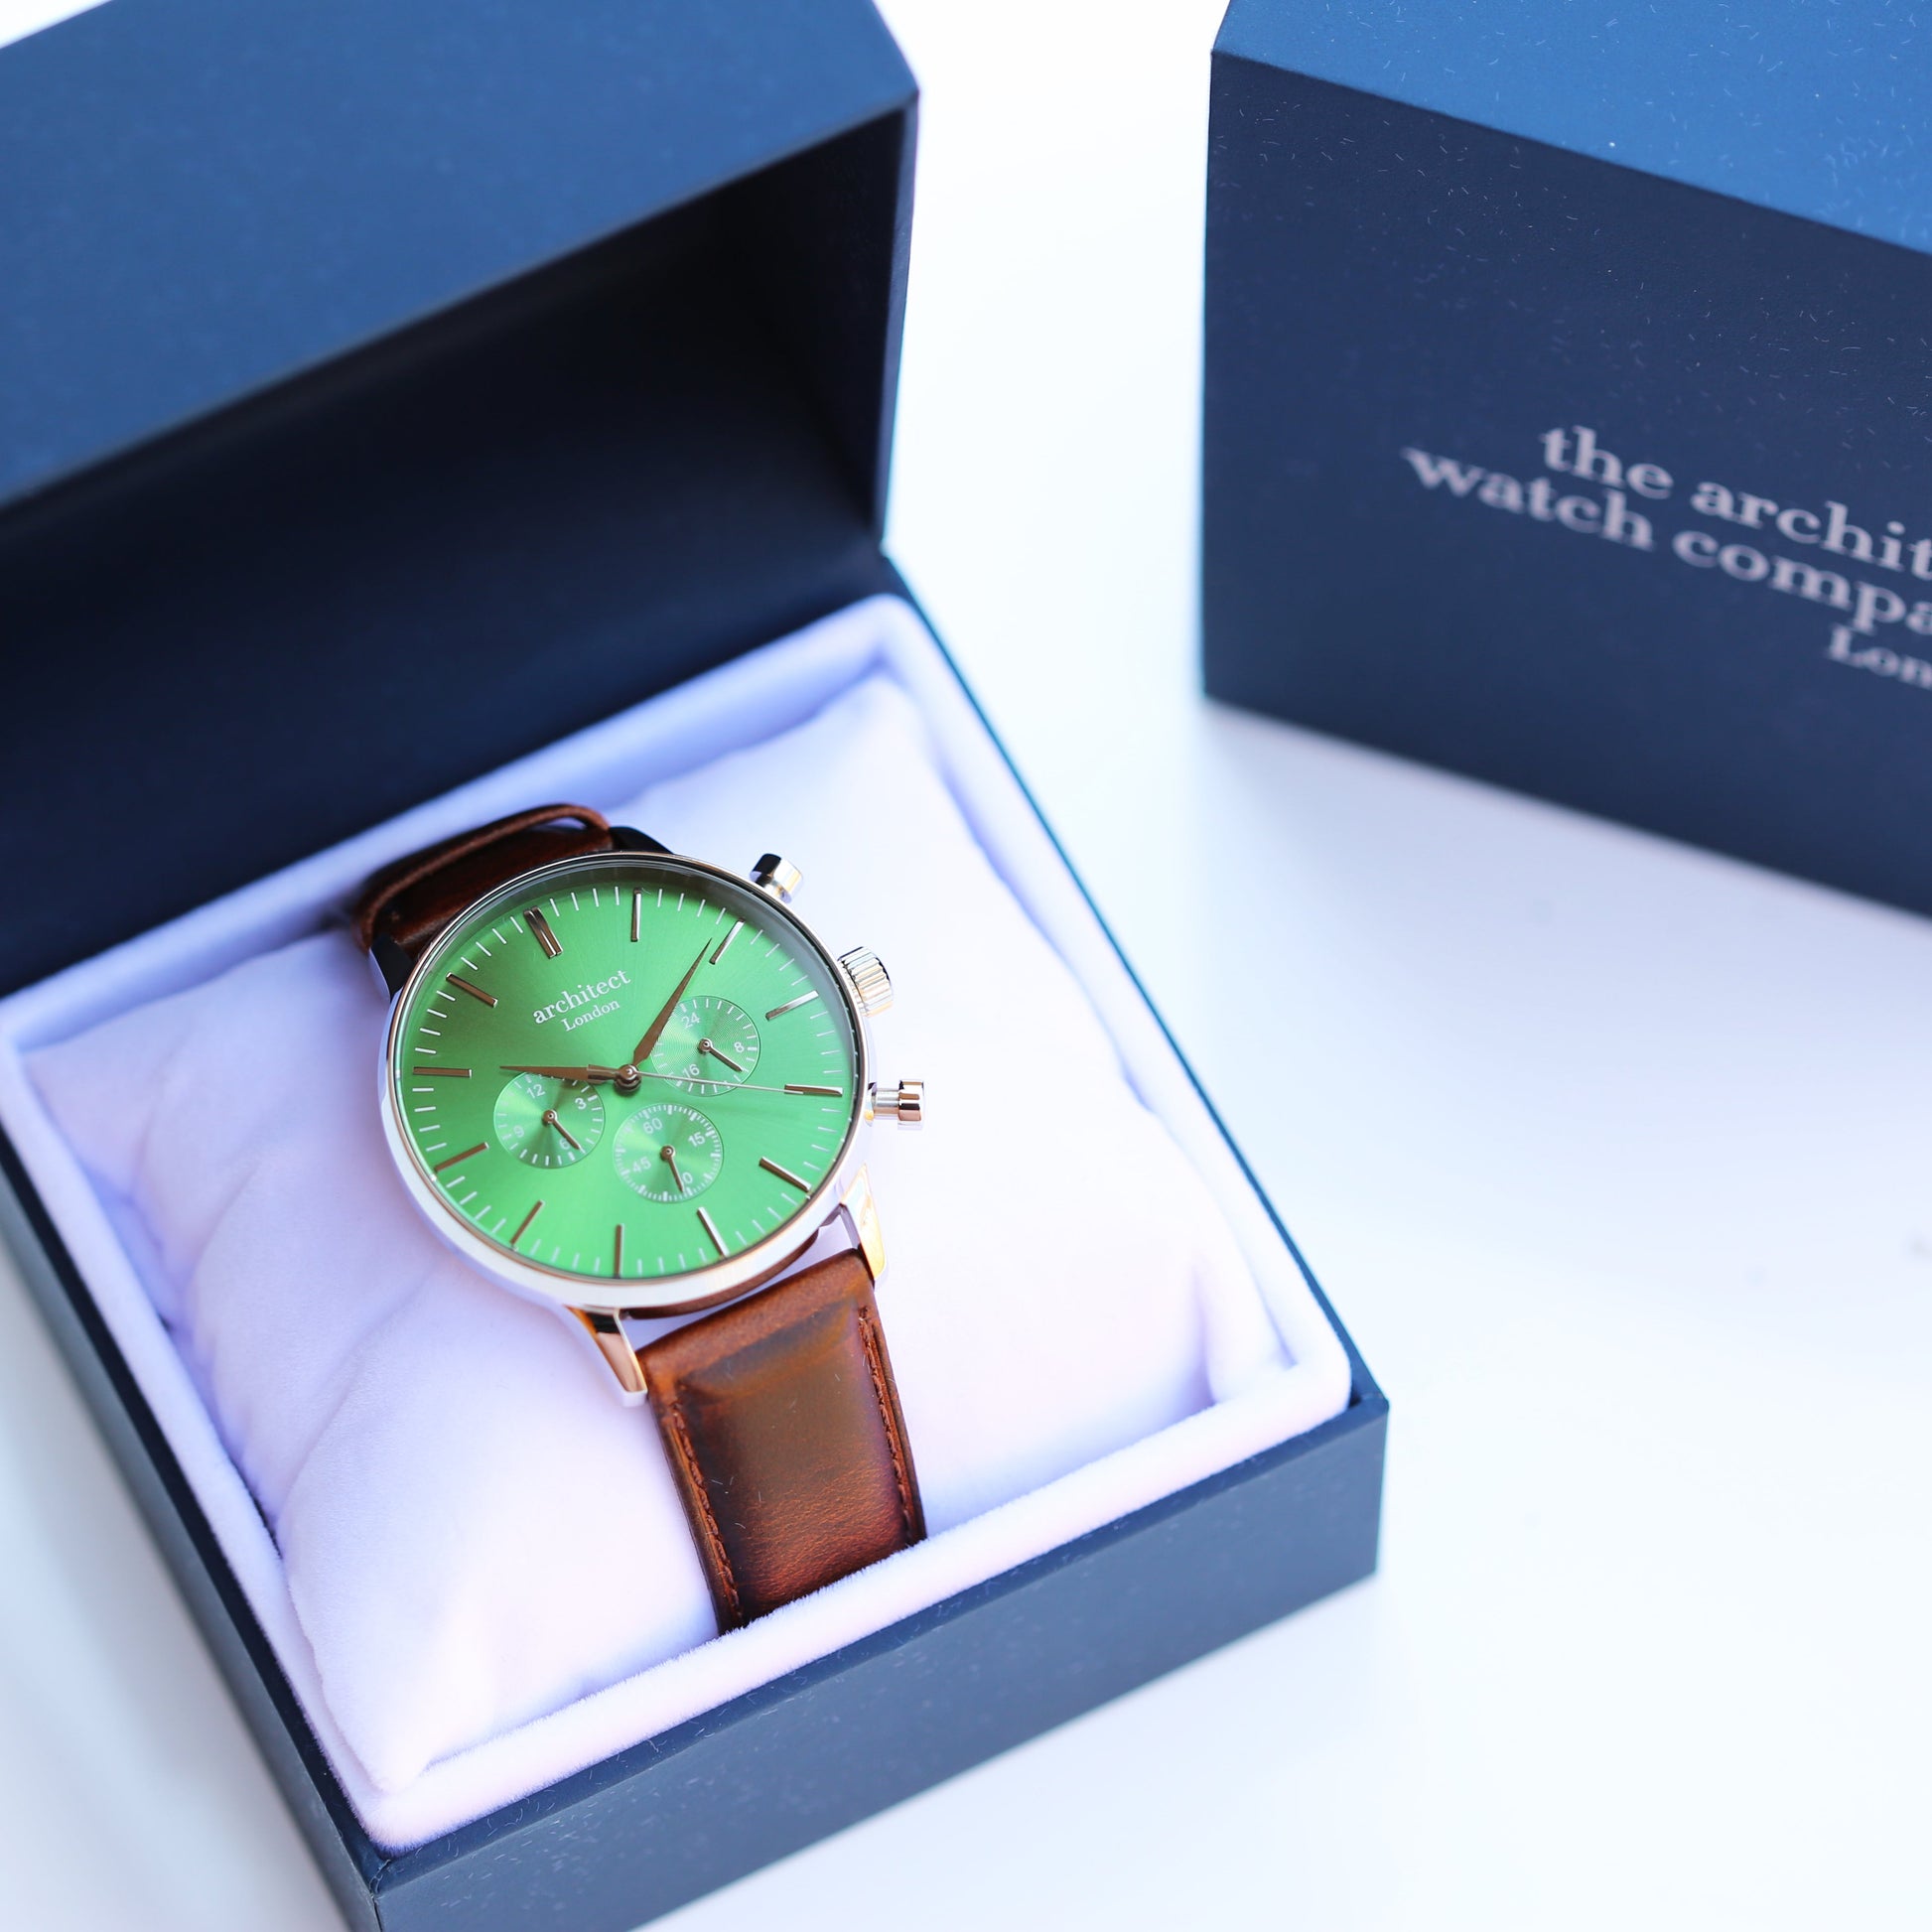 Personalized Men's Watches - Men's Architect Personalized Watch In Envy Green & Walnut 